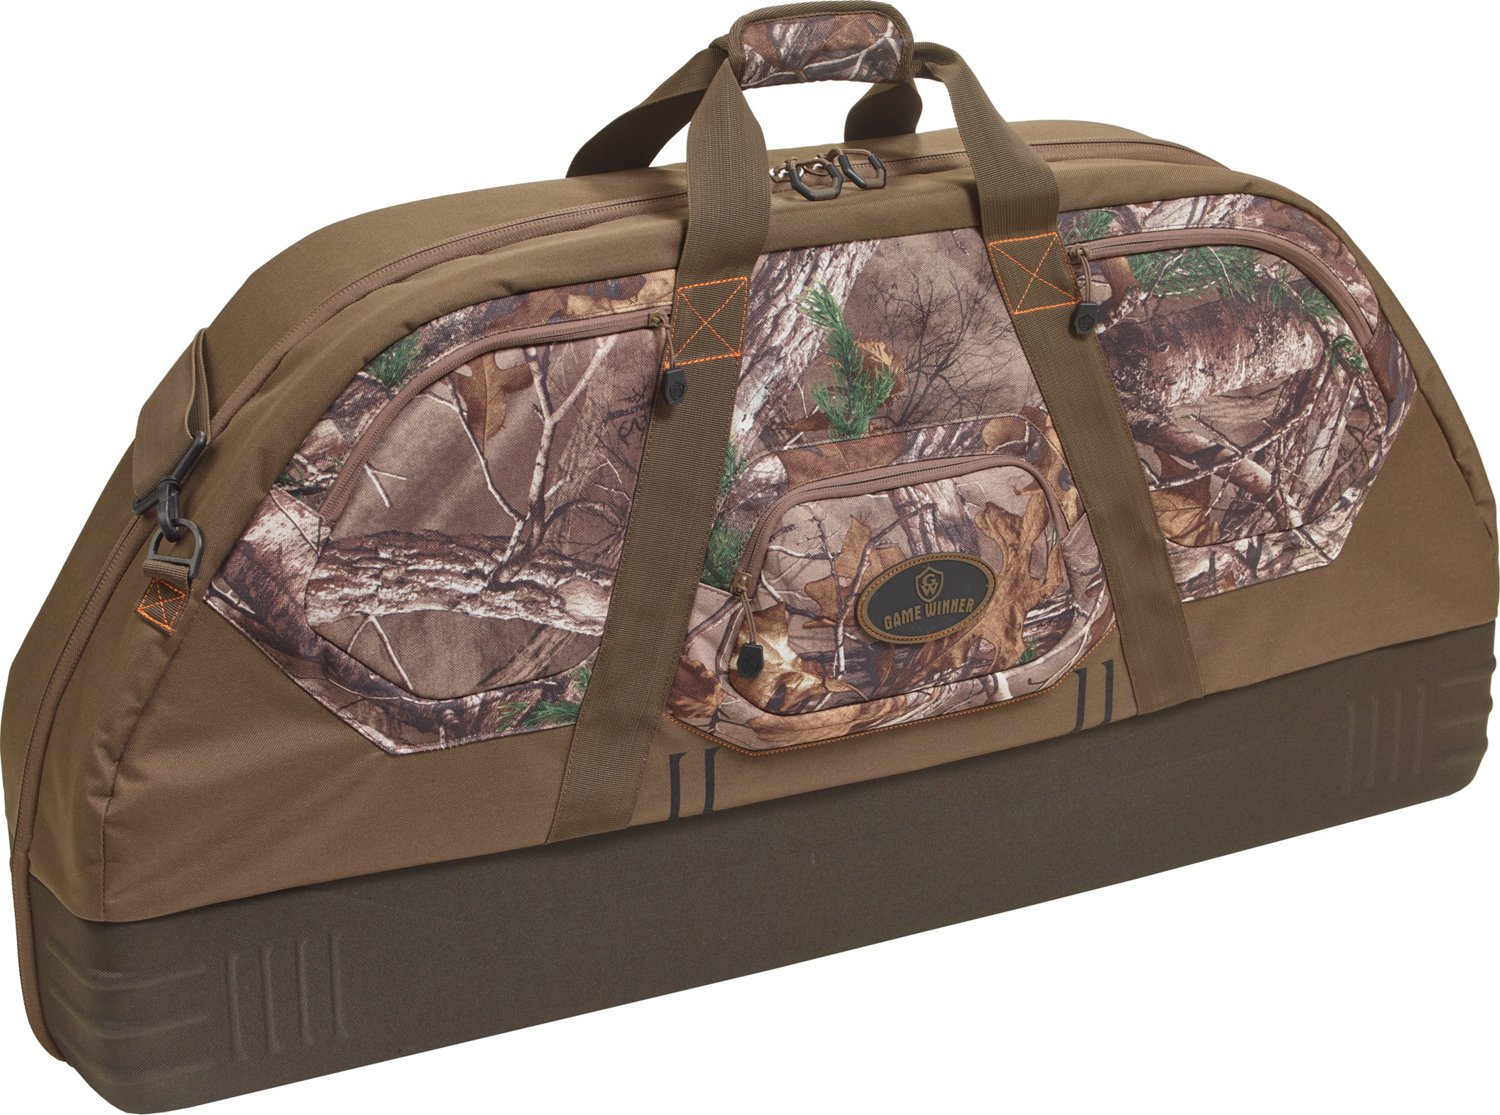 Bow Cases & Crossbow Cases